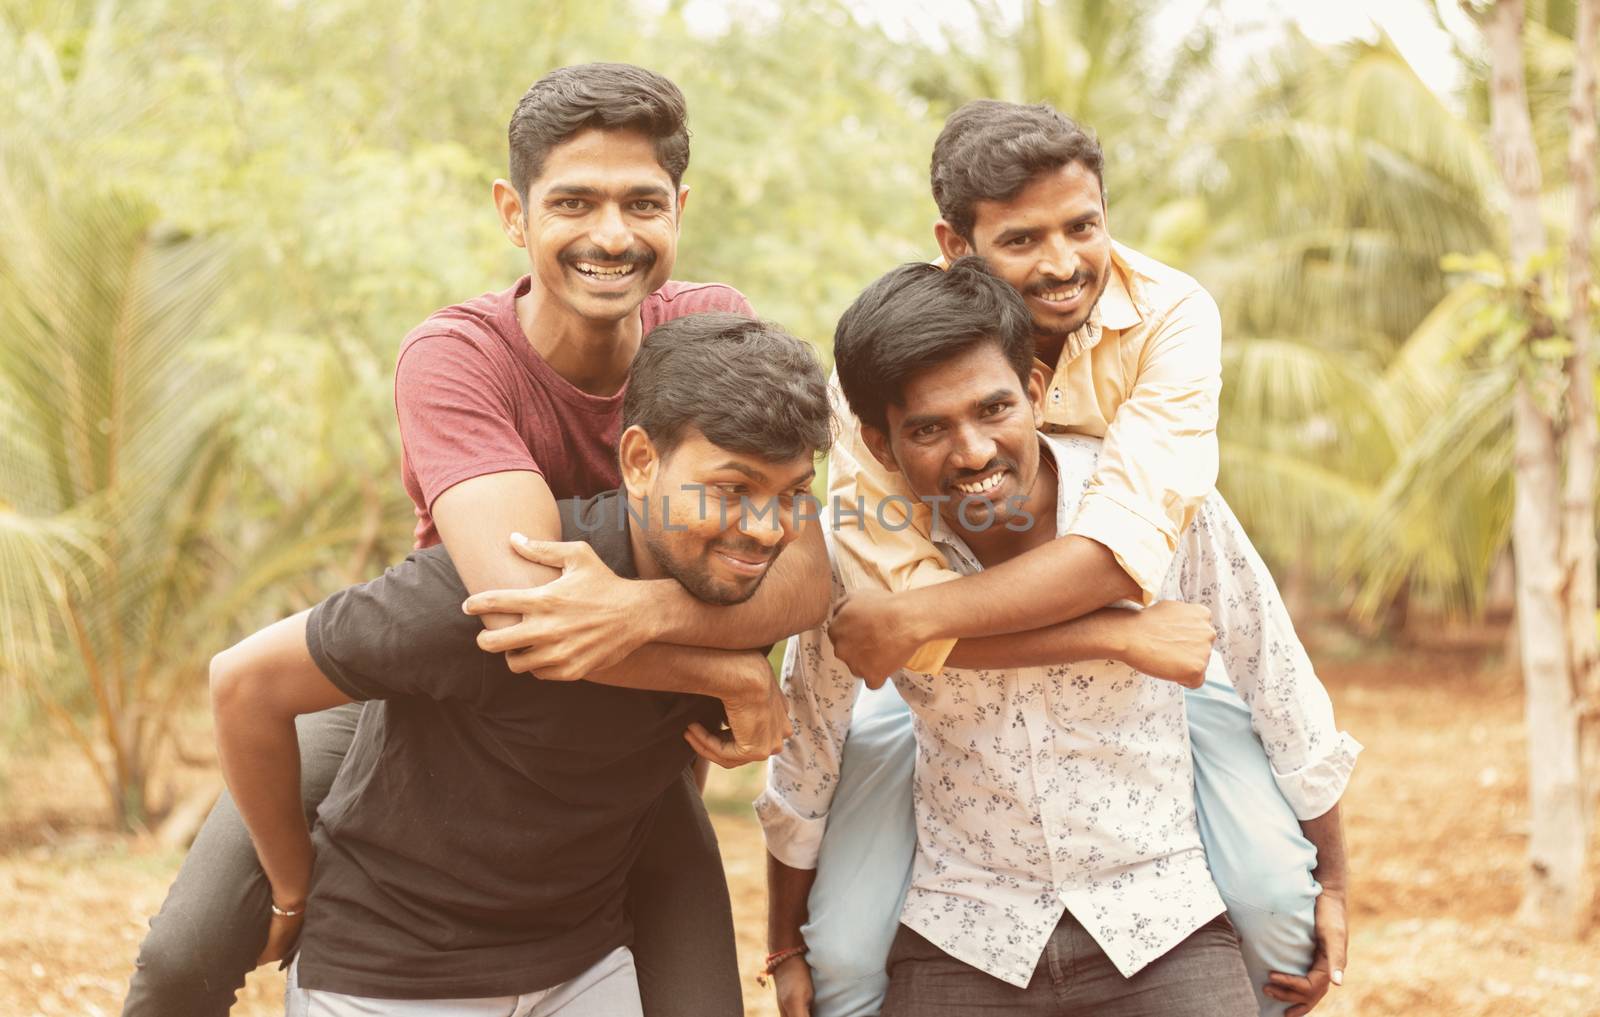 Best male friends Piggyback - Group Of Friends Having Fun Together Outdoors - Cheerful young male friends enjoying time together